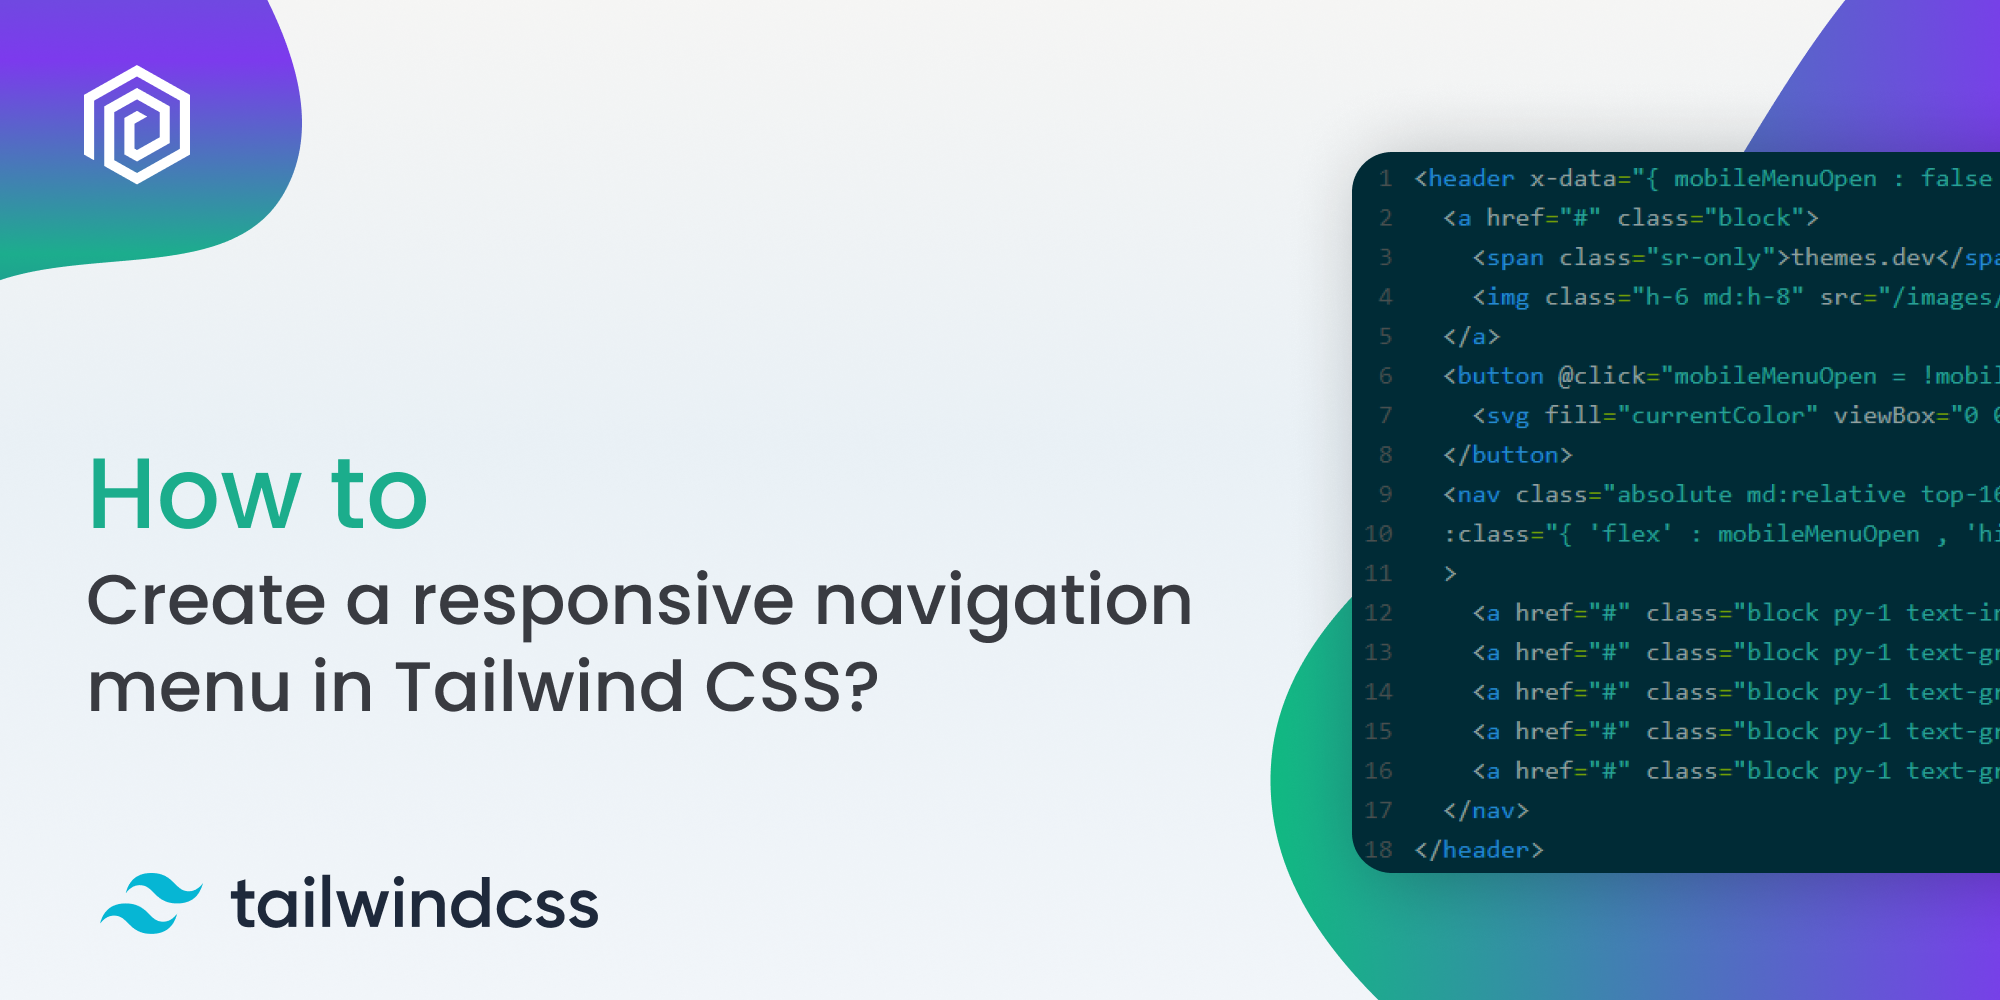 How to create a responsive navigation menu in Tailwind CSS?